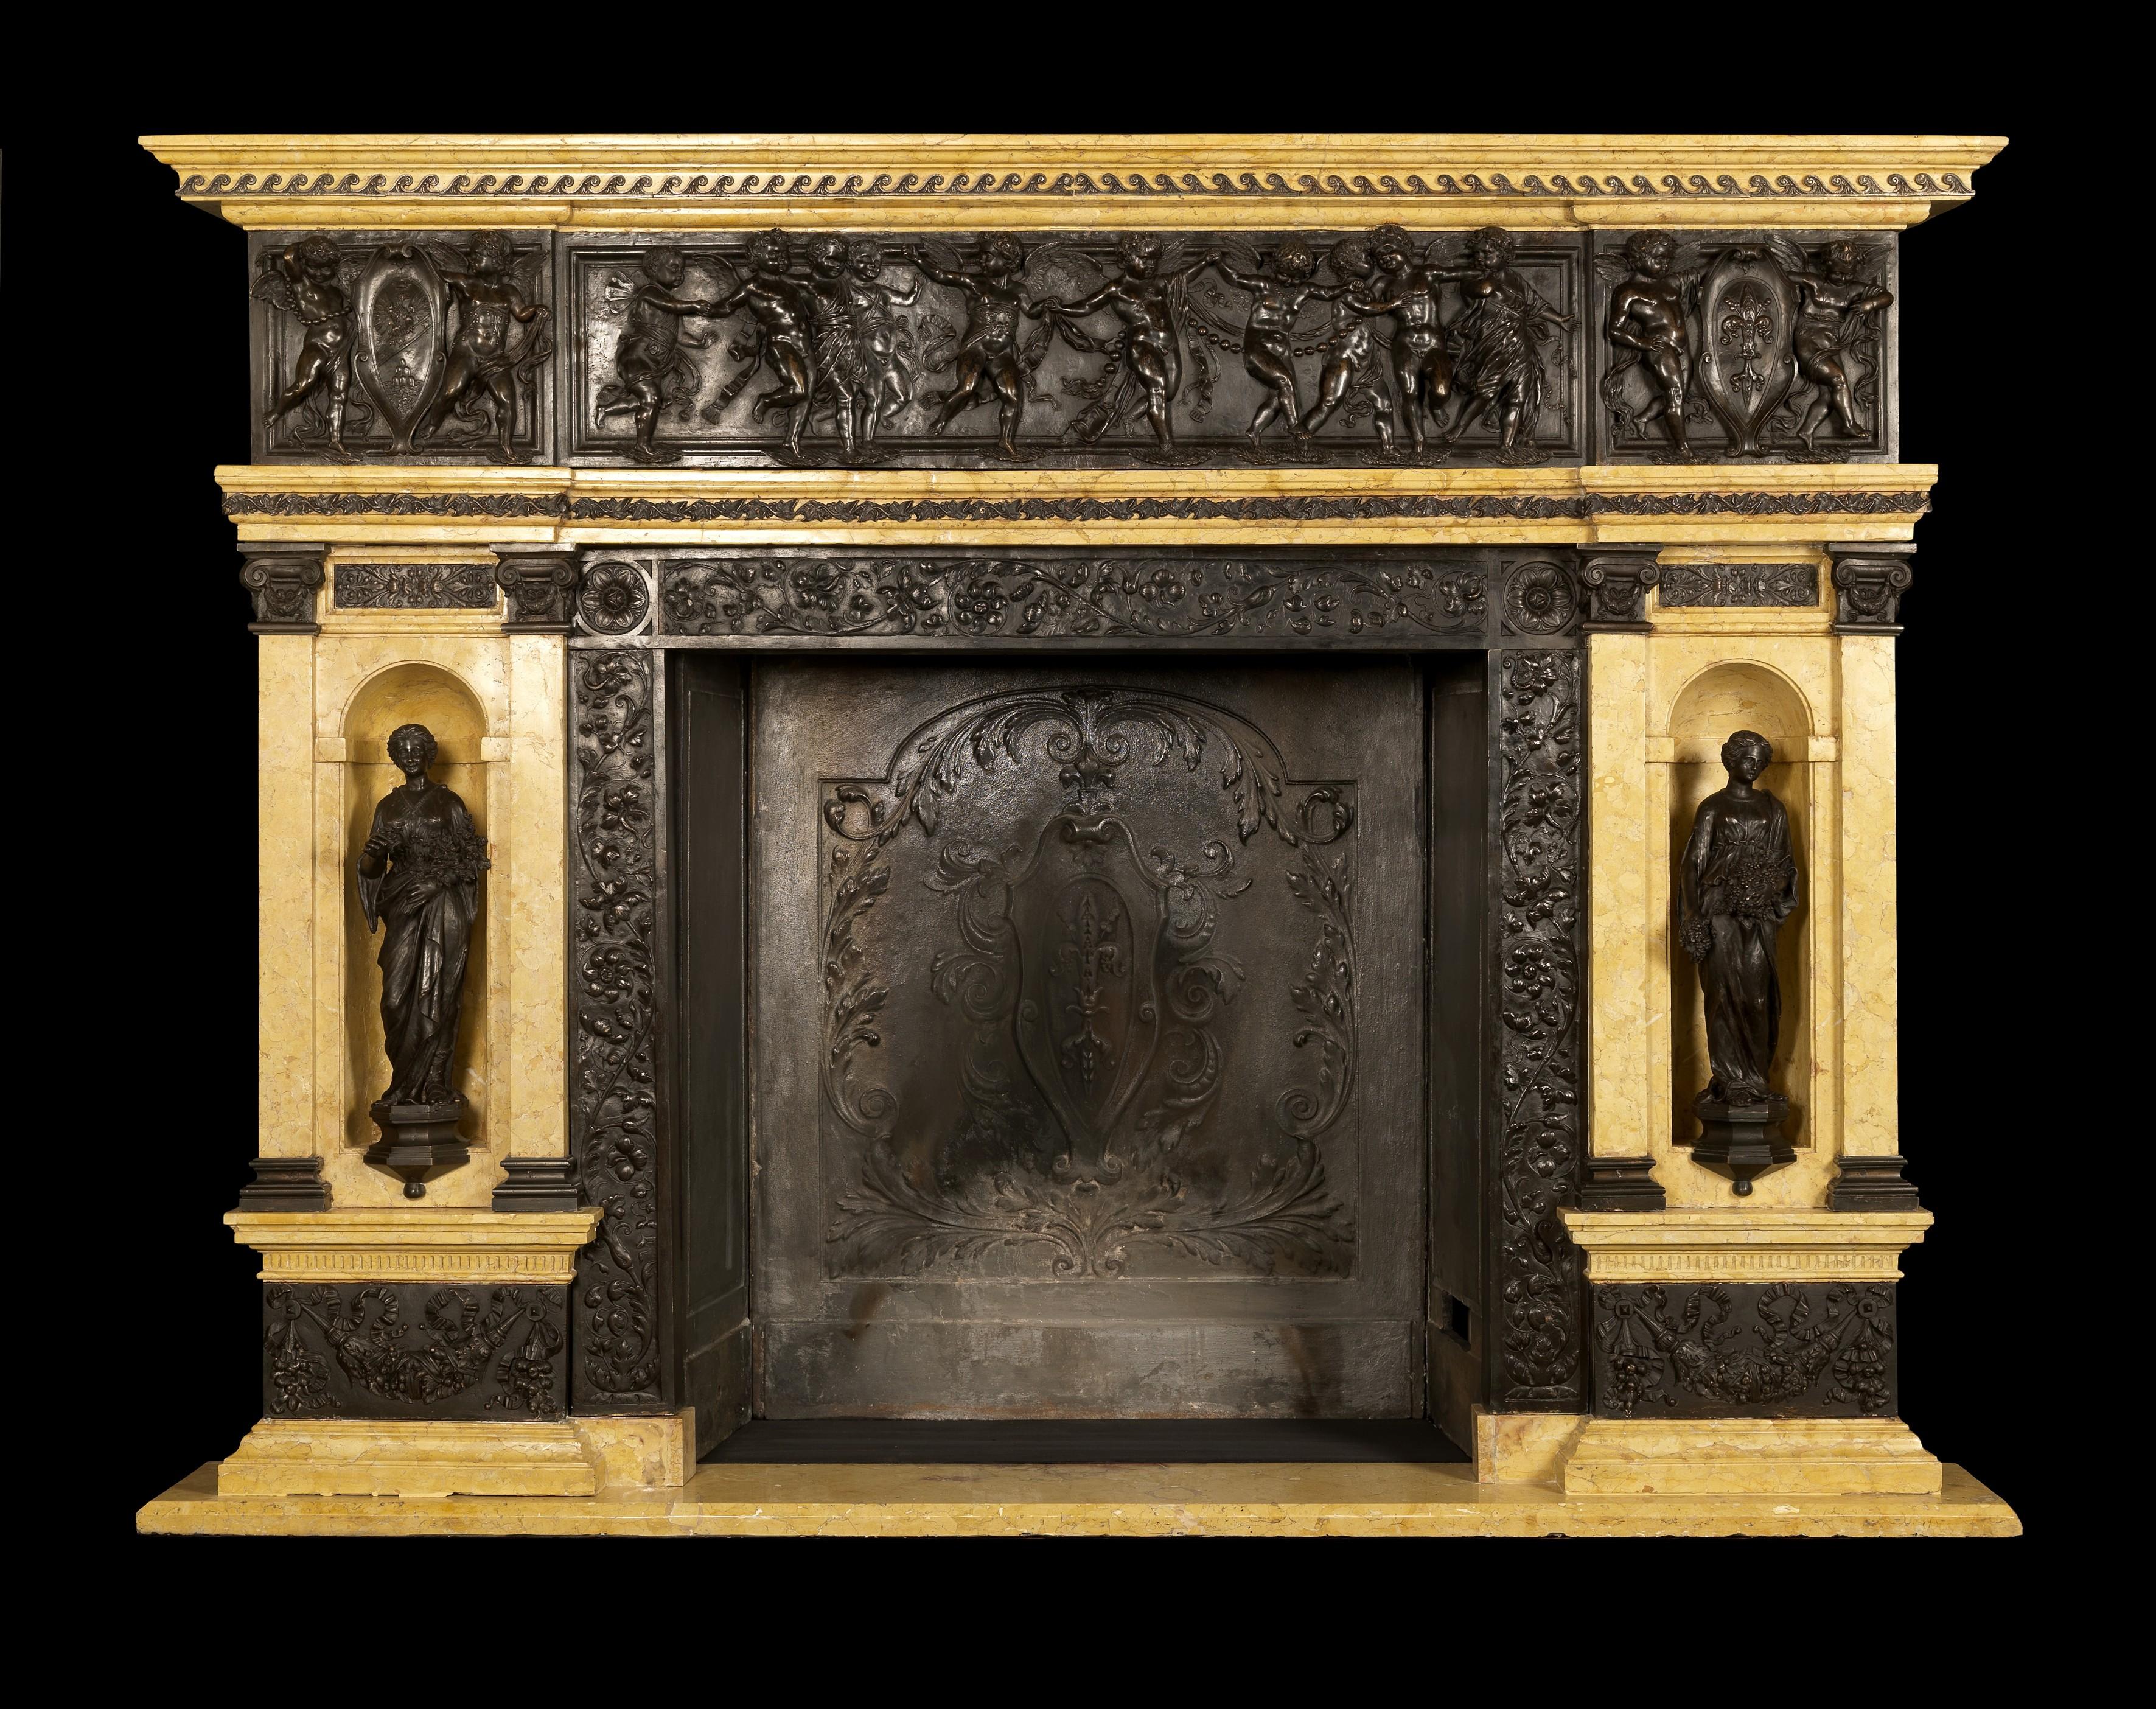 A highly important patinated bronze and Sienna marble fireplace of palatial proportions with finely cast bronze panels and classical figures depicting 'Printemps' and 'Automne'. 

French, circa 1850. 

This magnificent Fireplace has a molded